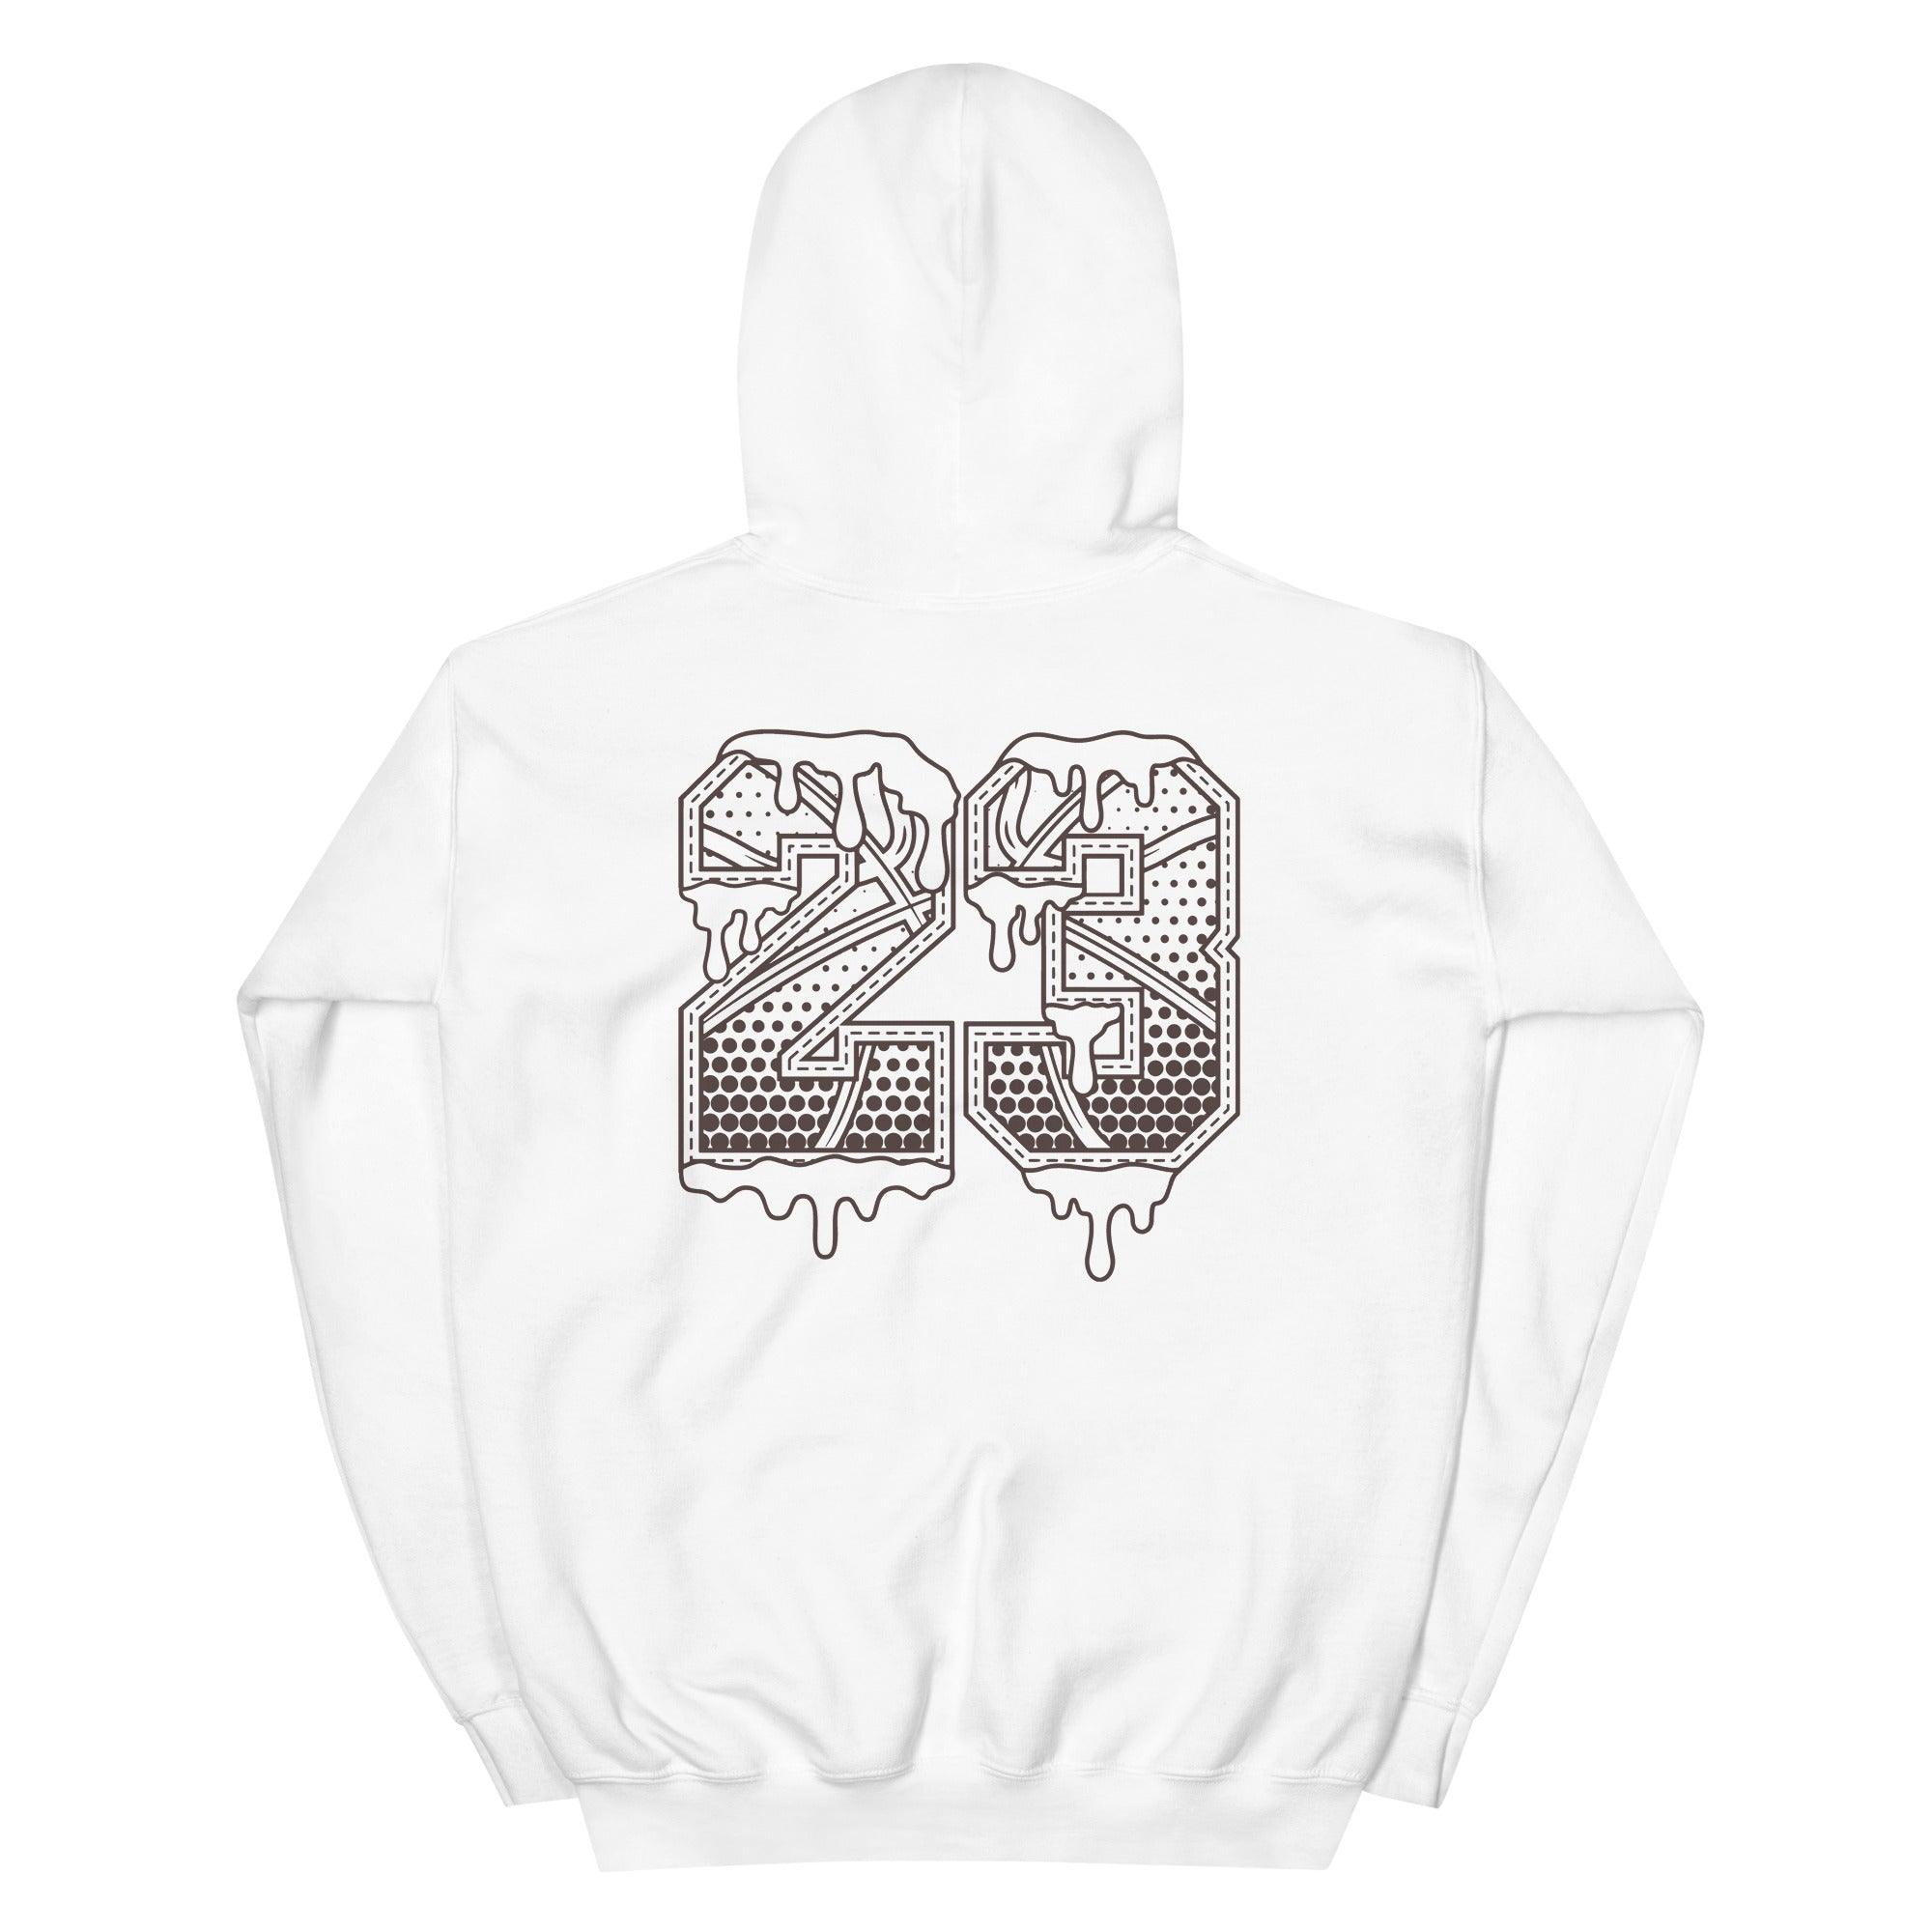 Number 23 Ball Hoodie Nike Air Force 1 Low White Chocolate photo